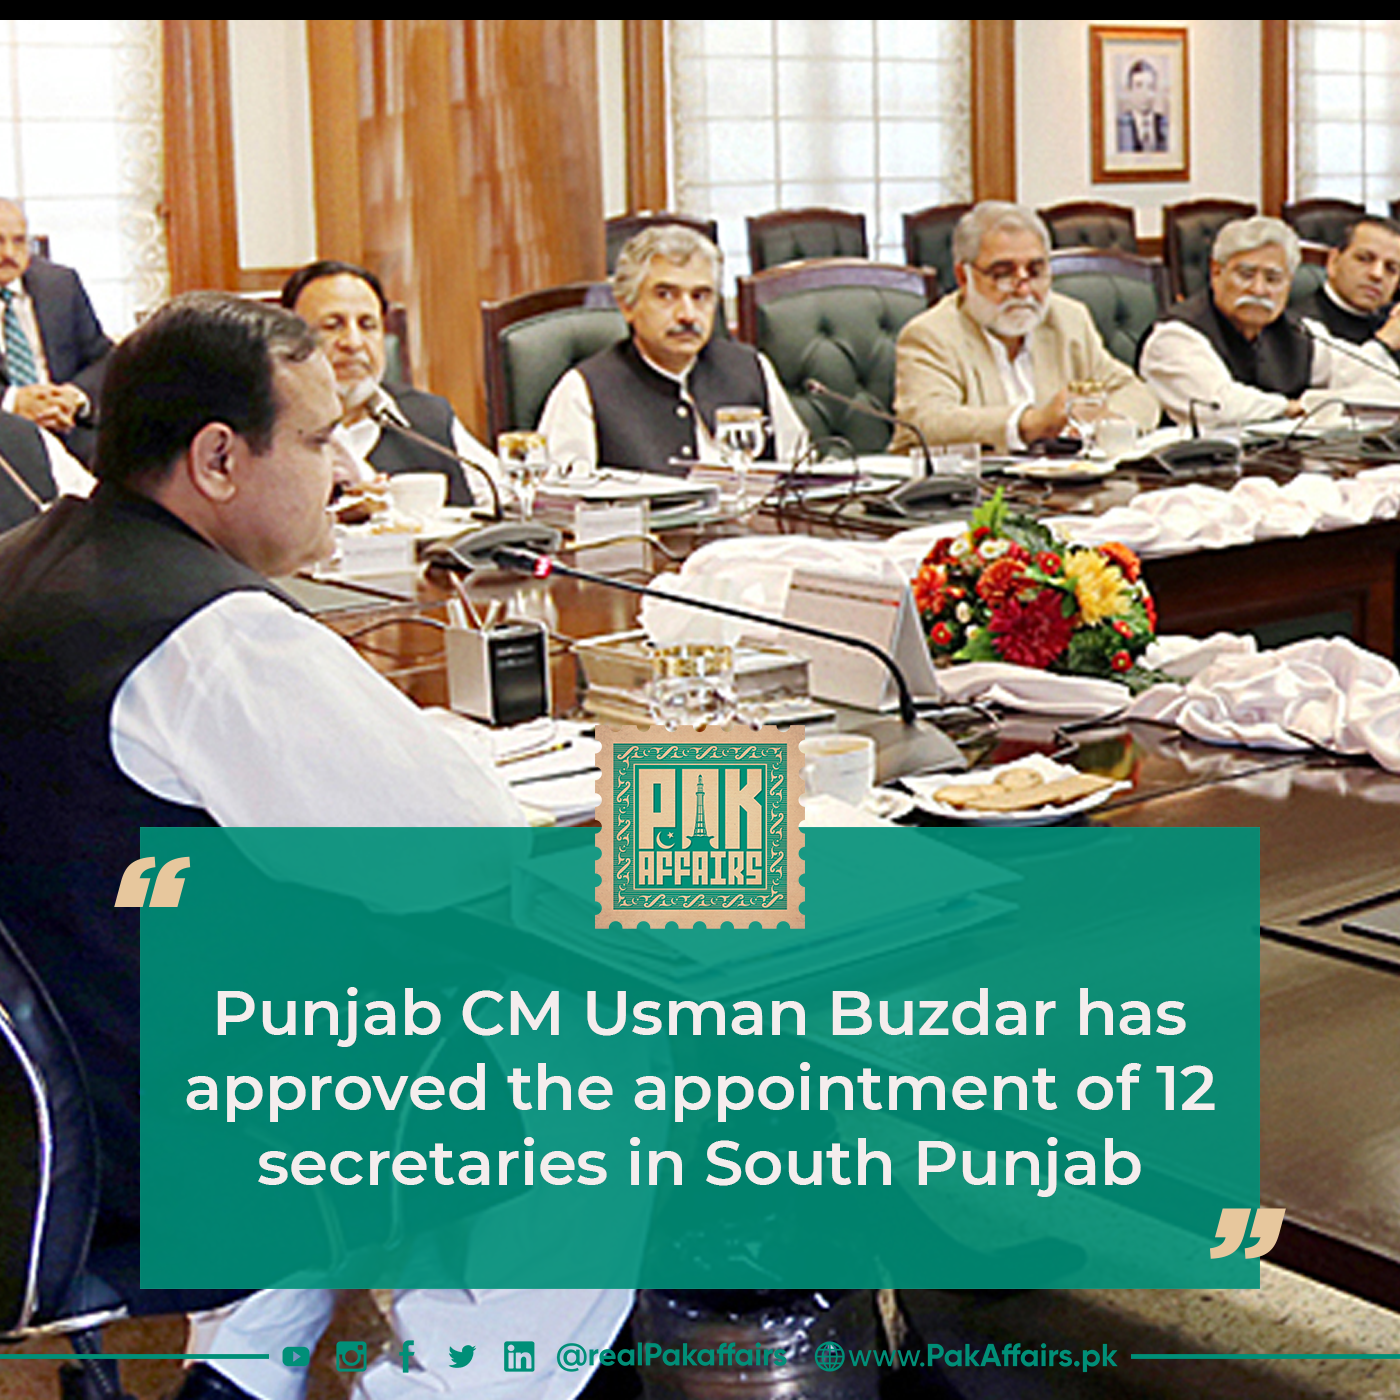 Punjab CM Usman Buzdar has approved the appointment of 12 secretaries in South Punjab